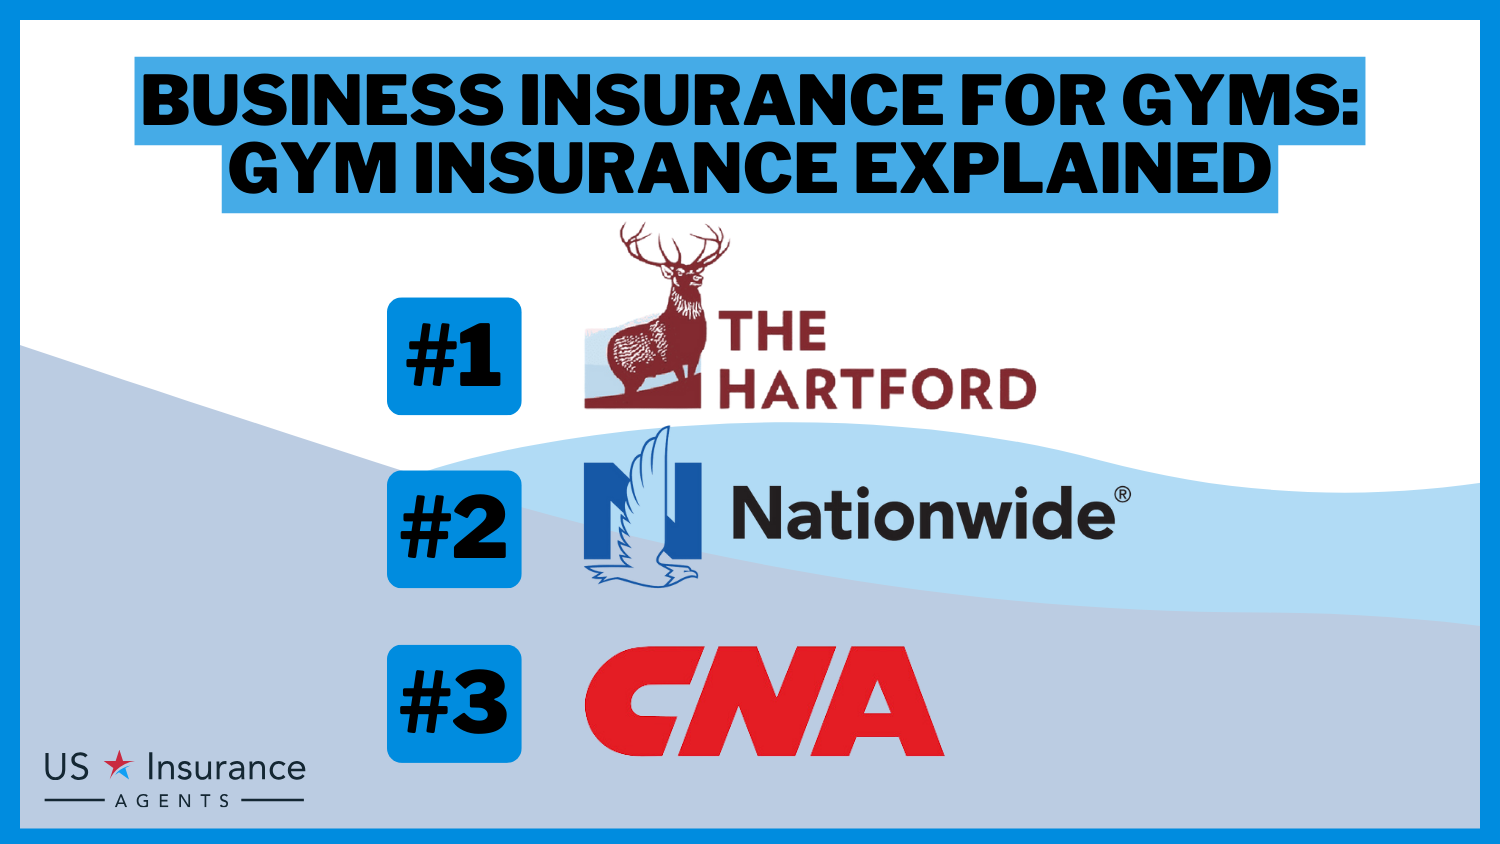 Best Business Insurance for Gyms: The Hartford, Nationwide and CNA.